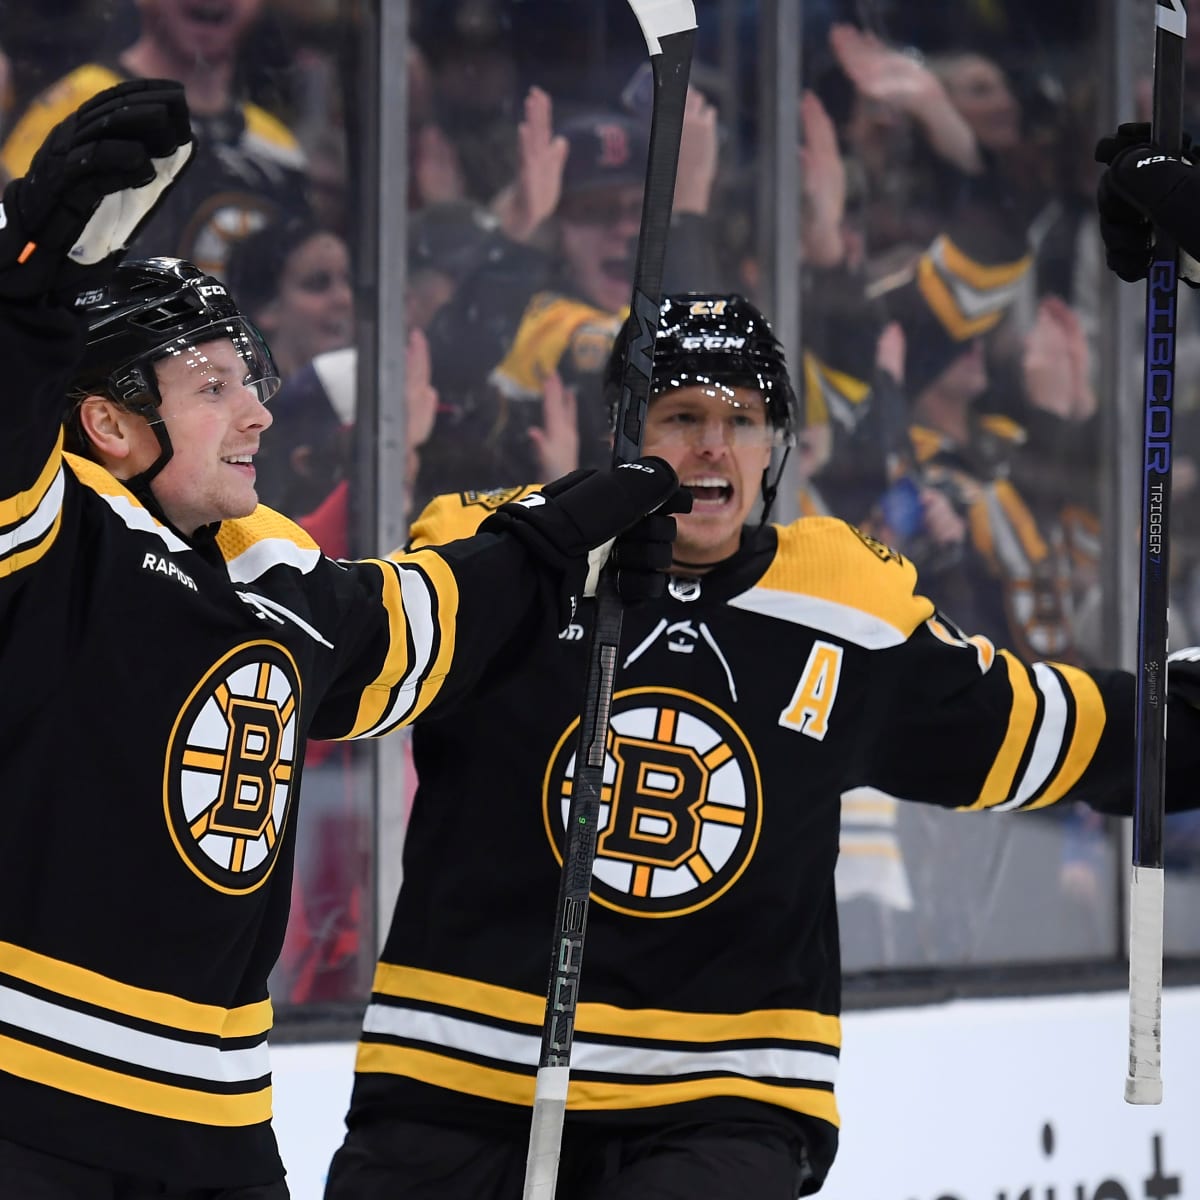 Bruins' Marc McLaughlin, of North Billerica, scores in NHL debut: 'I feel  like I've lived that moment a 100 million times down in my basement' 